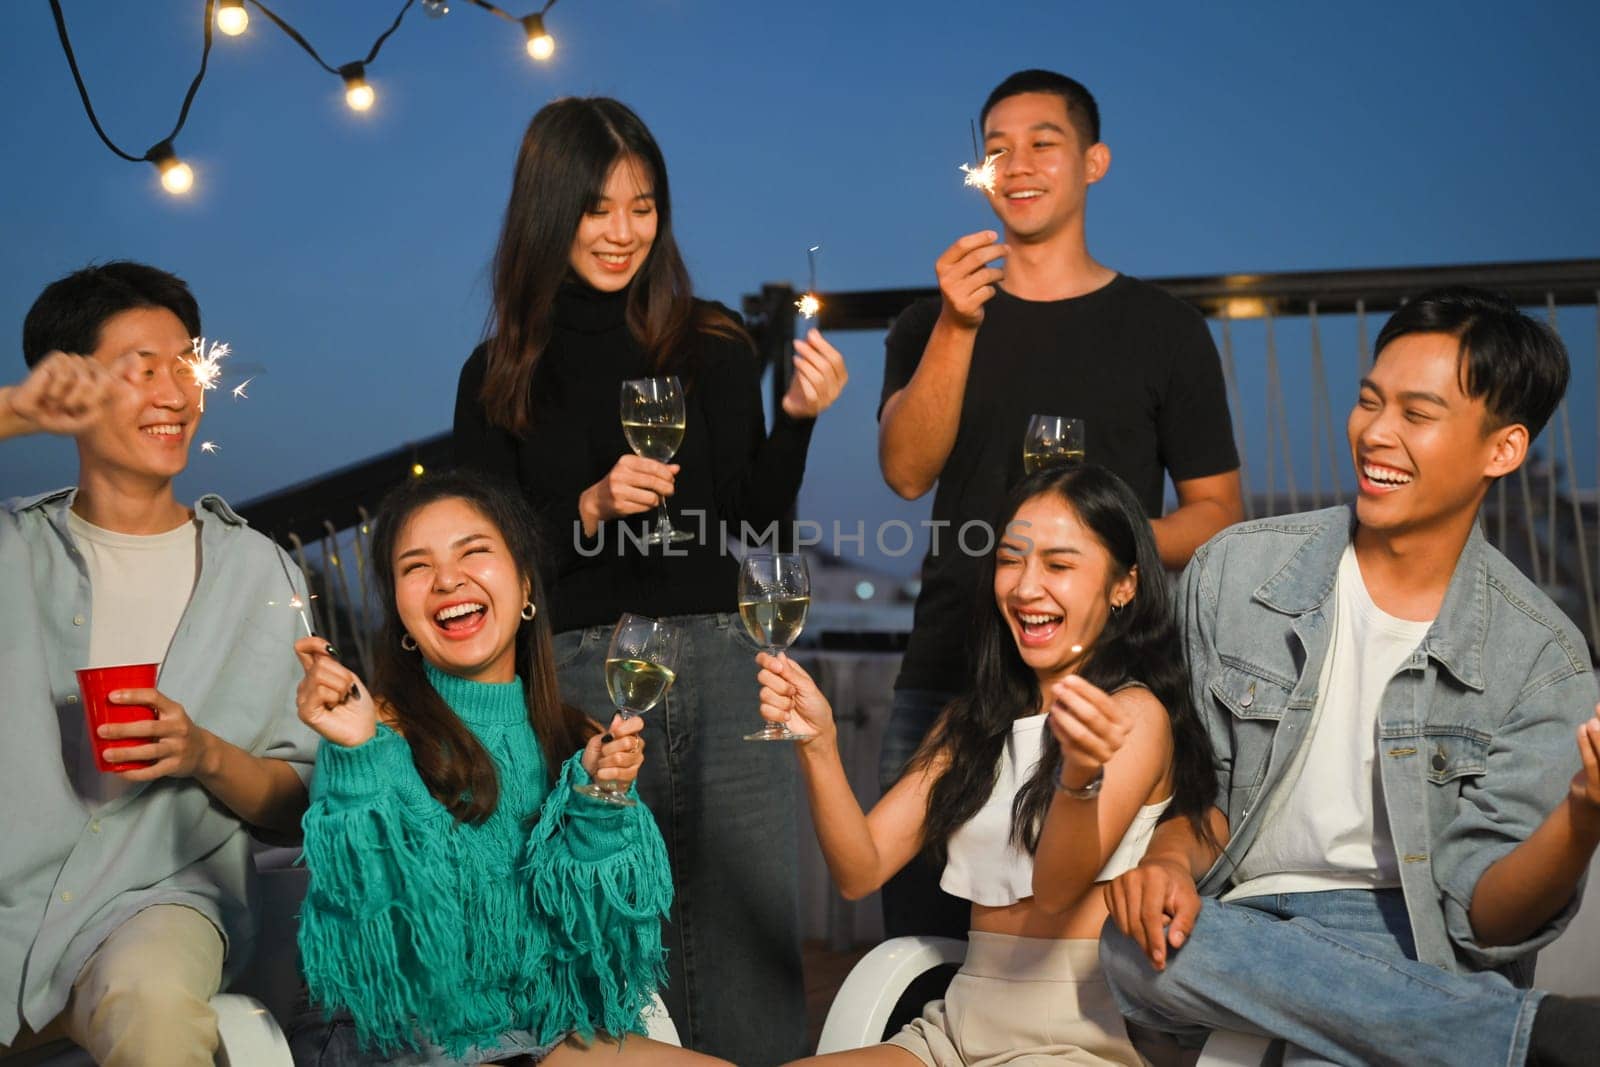 Group of young adult friends laughing and having fun at rooftop party. Friendship lifestyle concept.